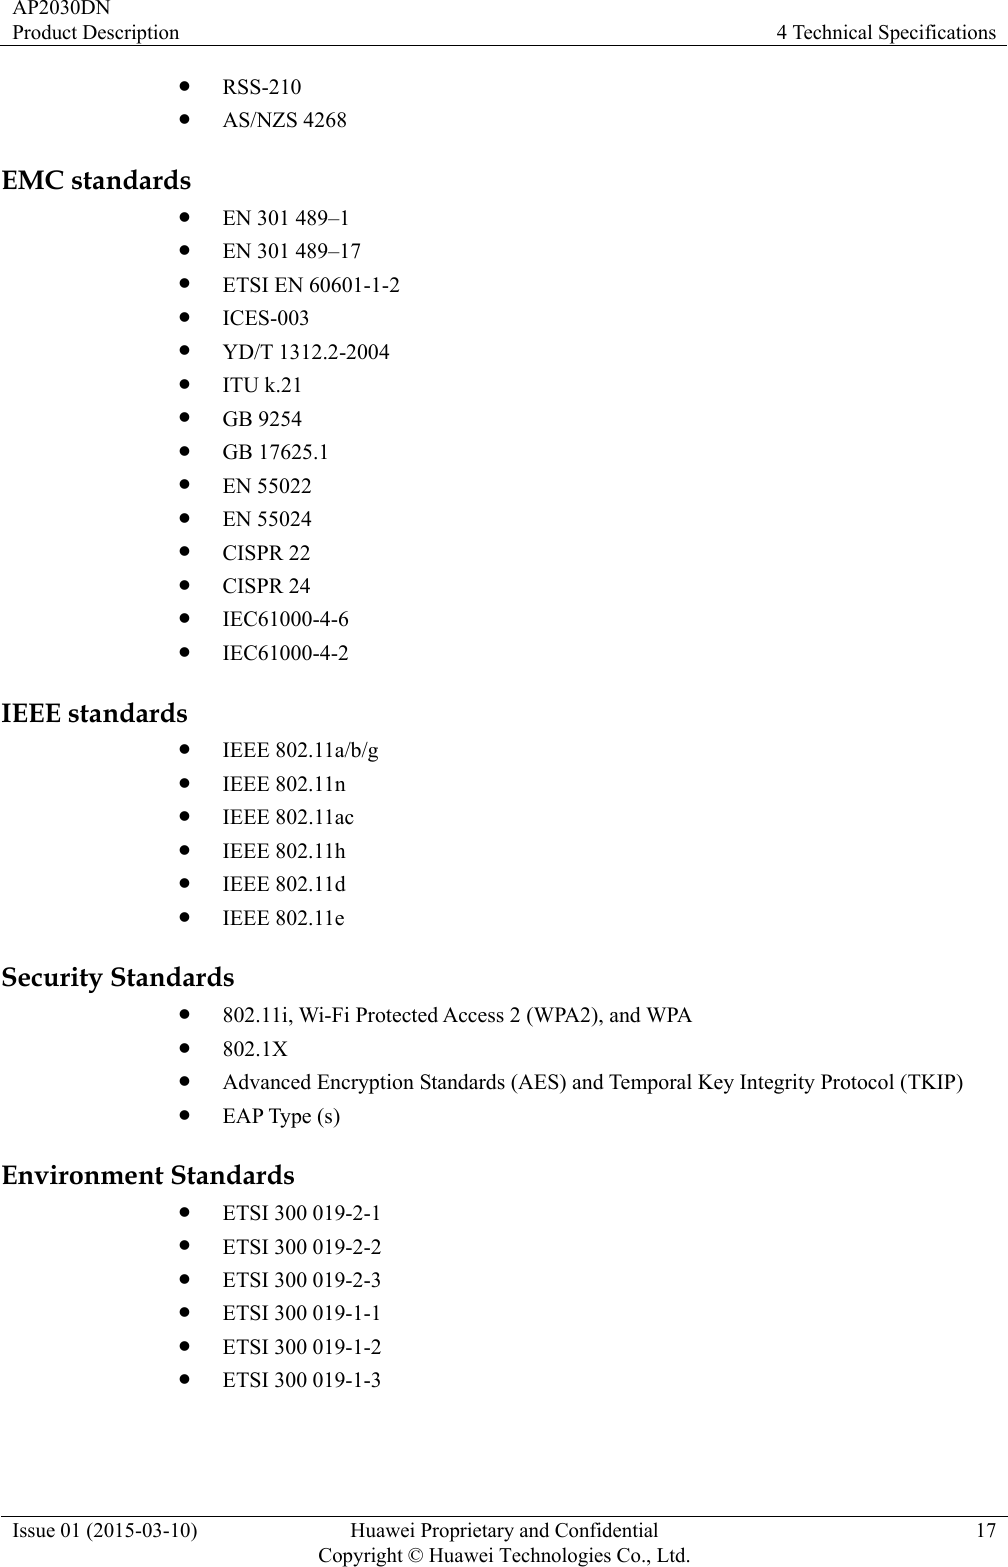 AP2030DN Product Description  4 Technical Specifications Issue 01 (2015-03-10)  Huawei Proprietary and Confidential         Copyright © Huawei Technologies Co., Ltd.17 z RSS-210 z AS/NZS 4268 EMC standards z EN 301 489–1 z EN 301 489–17 z ETSI EN 60601-1-2   z ICES-003 z YD/T 1312.2-2004 z ITU k.21 z GB 9254 z GB 17625.1 z EN 55022 z EN 55024 z CISPR 22 z CISPR 24 z IEC61000-4-6 z IEC61000-4-2 IEEE standards z IEEE 802.11a/b/g z IEEE 802.11n z IEEE 802.11ac z IEEE 802.11h z IEEE 802.11d z IEEE 802.11e Security Standards z 802.11i, Wi-Fi Protected Access 2 (WPA2), and WPA z 802.1X z Advanced Encryption Standards (AES) and Temporal Key Integrity Protocol (TKIP) z EAP Type (s) Environment Standards z ETSI 300 019-2-1 z ETSI 300 019-2-2 z ETSI 300 019-2-3 z ETSI 300 019-1-1 z ETSI 300 019-1-2 z ETSI 300 019-1-3 